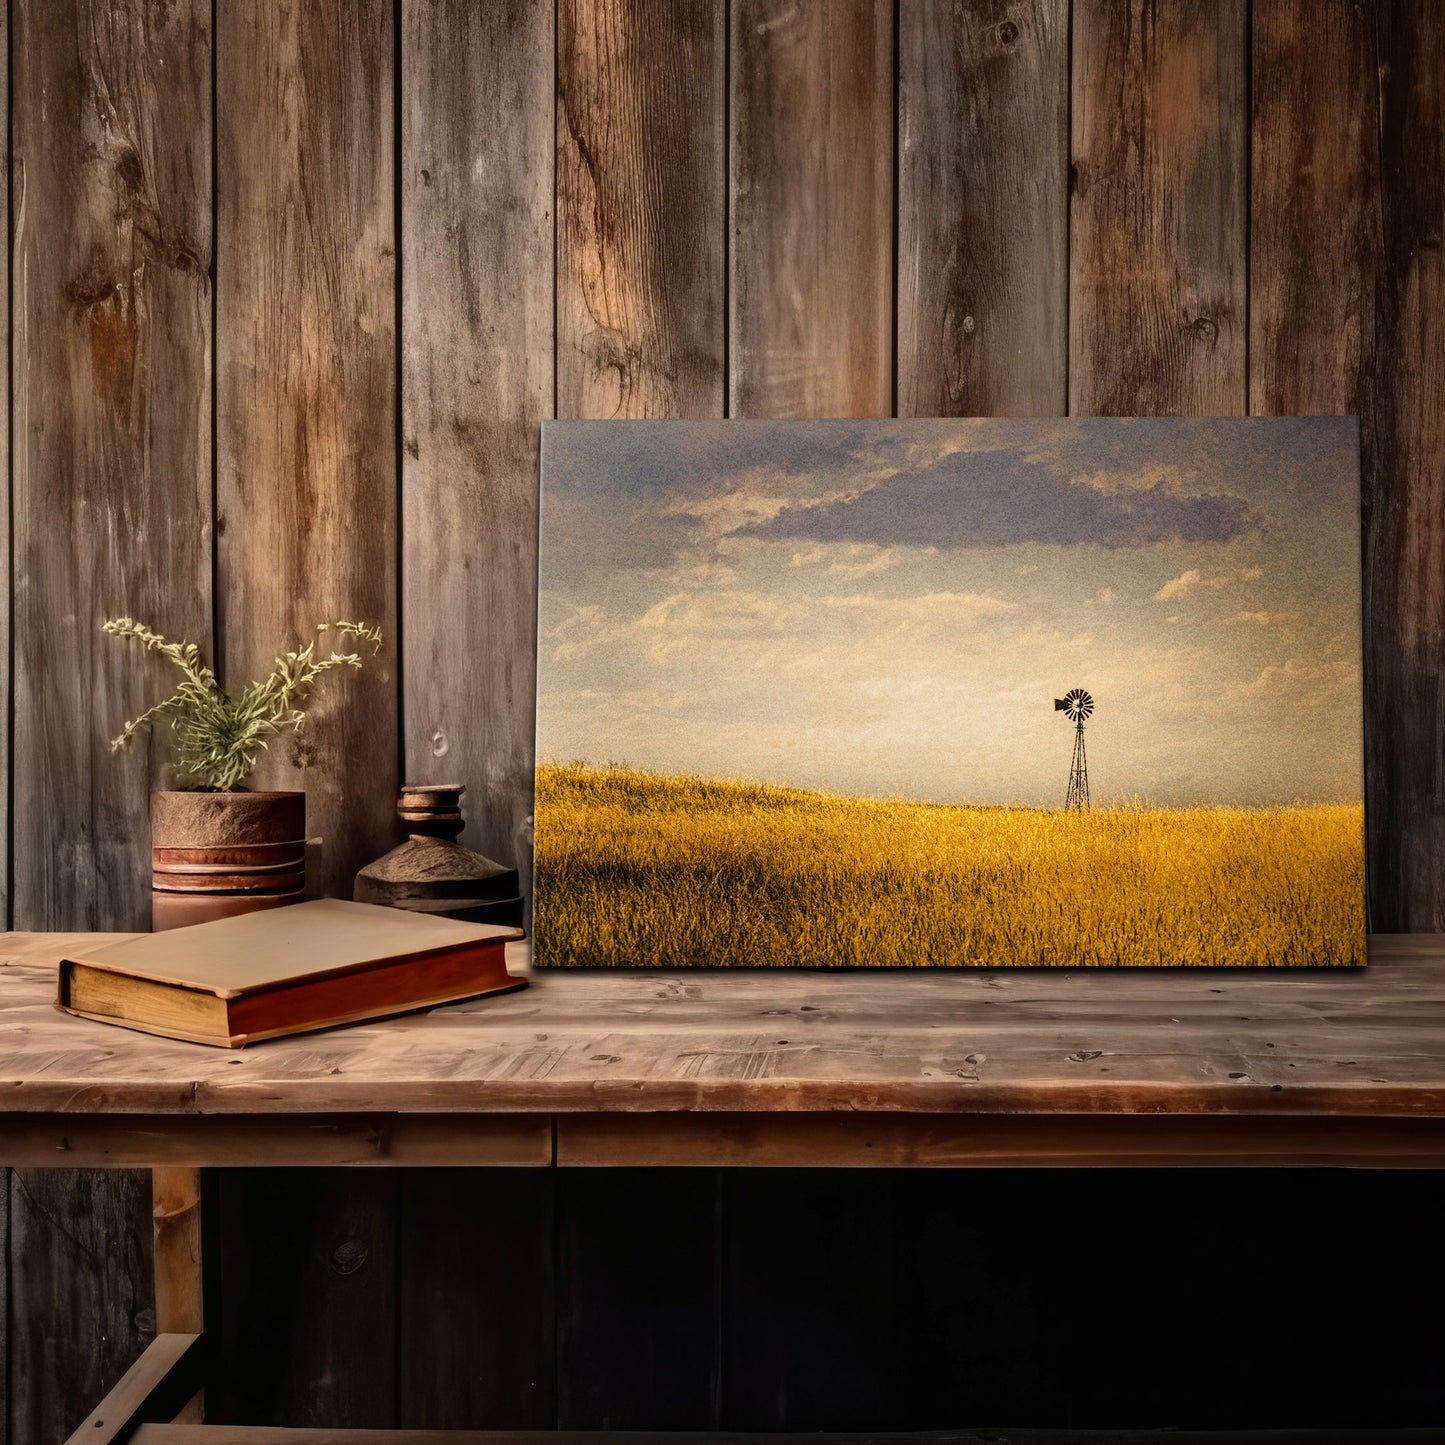 A touch of the Western frontier comes alive in this Nebraska windmill canvas, creating a focal point that's rich in history and natural beauty.